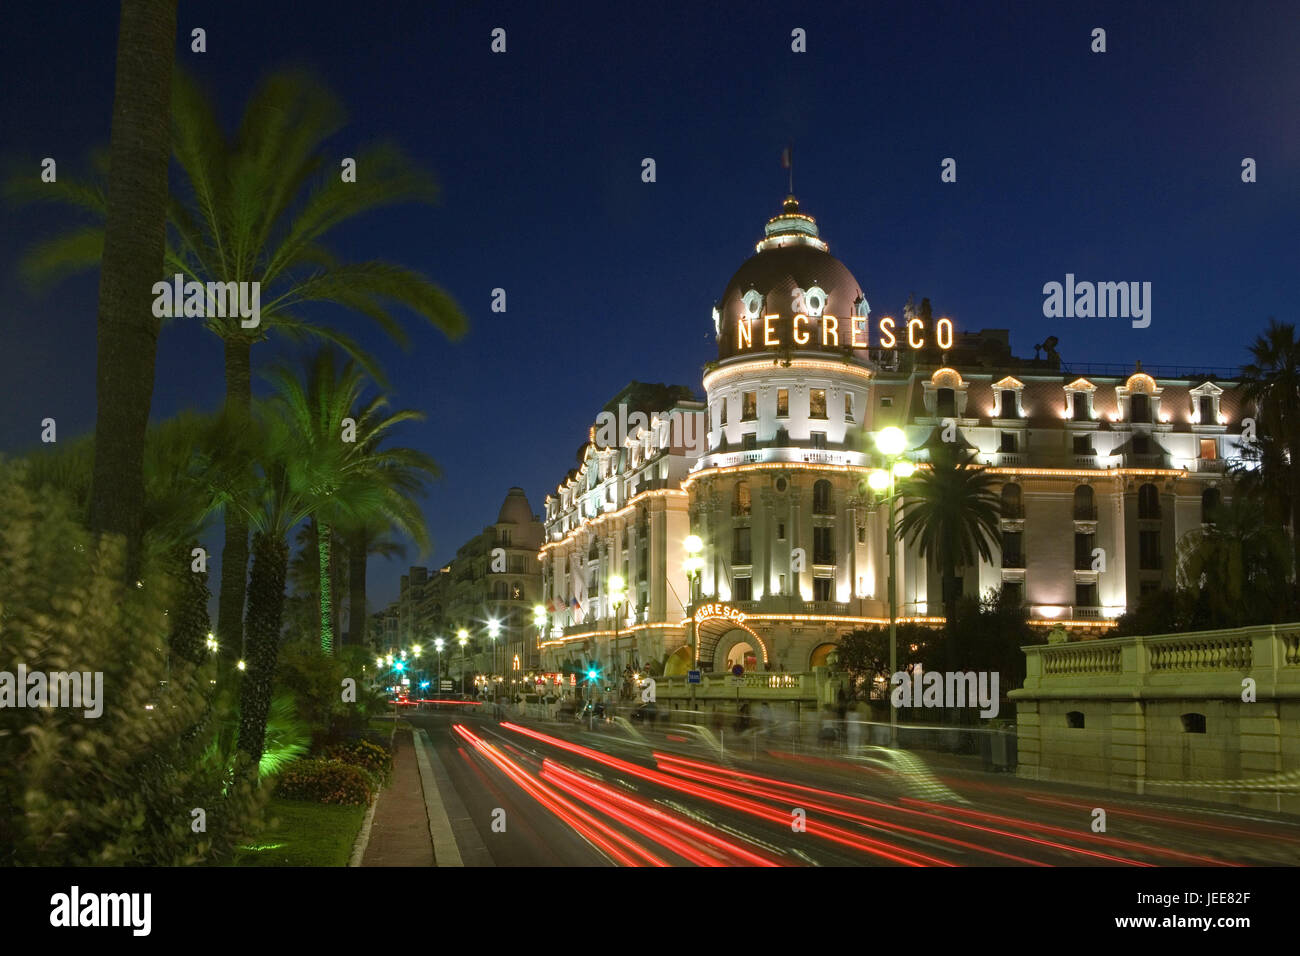 France, Provence, Cote d'Azur, Nice, hotel of 'Negresco', lighting, street scene, evening, the South of France, Mediterranean coast, town, Nice, five-star hotel, five-star hotel, hotel building, building, structure, architecture, place of interest, hotel business, destination, tourism, hotel stay, street, traffic, light tracks, Stock Photo